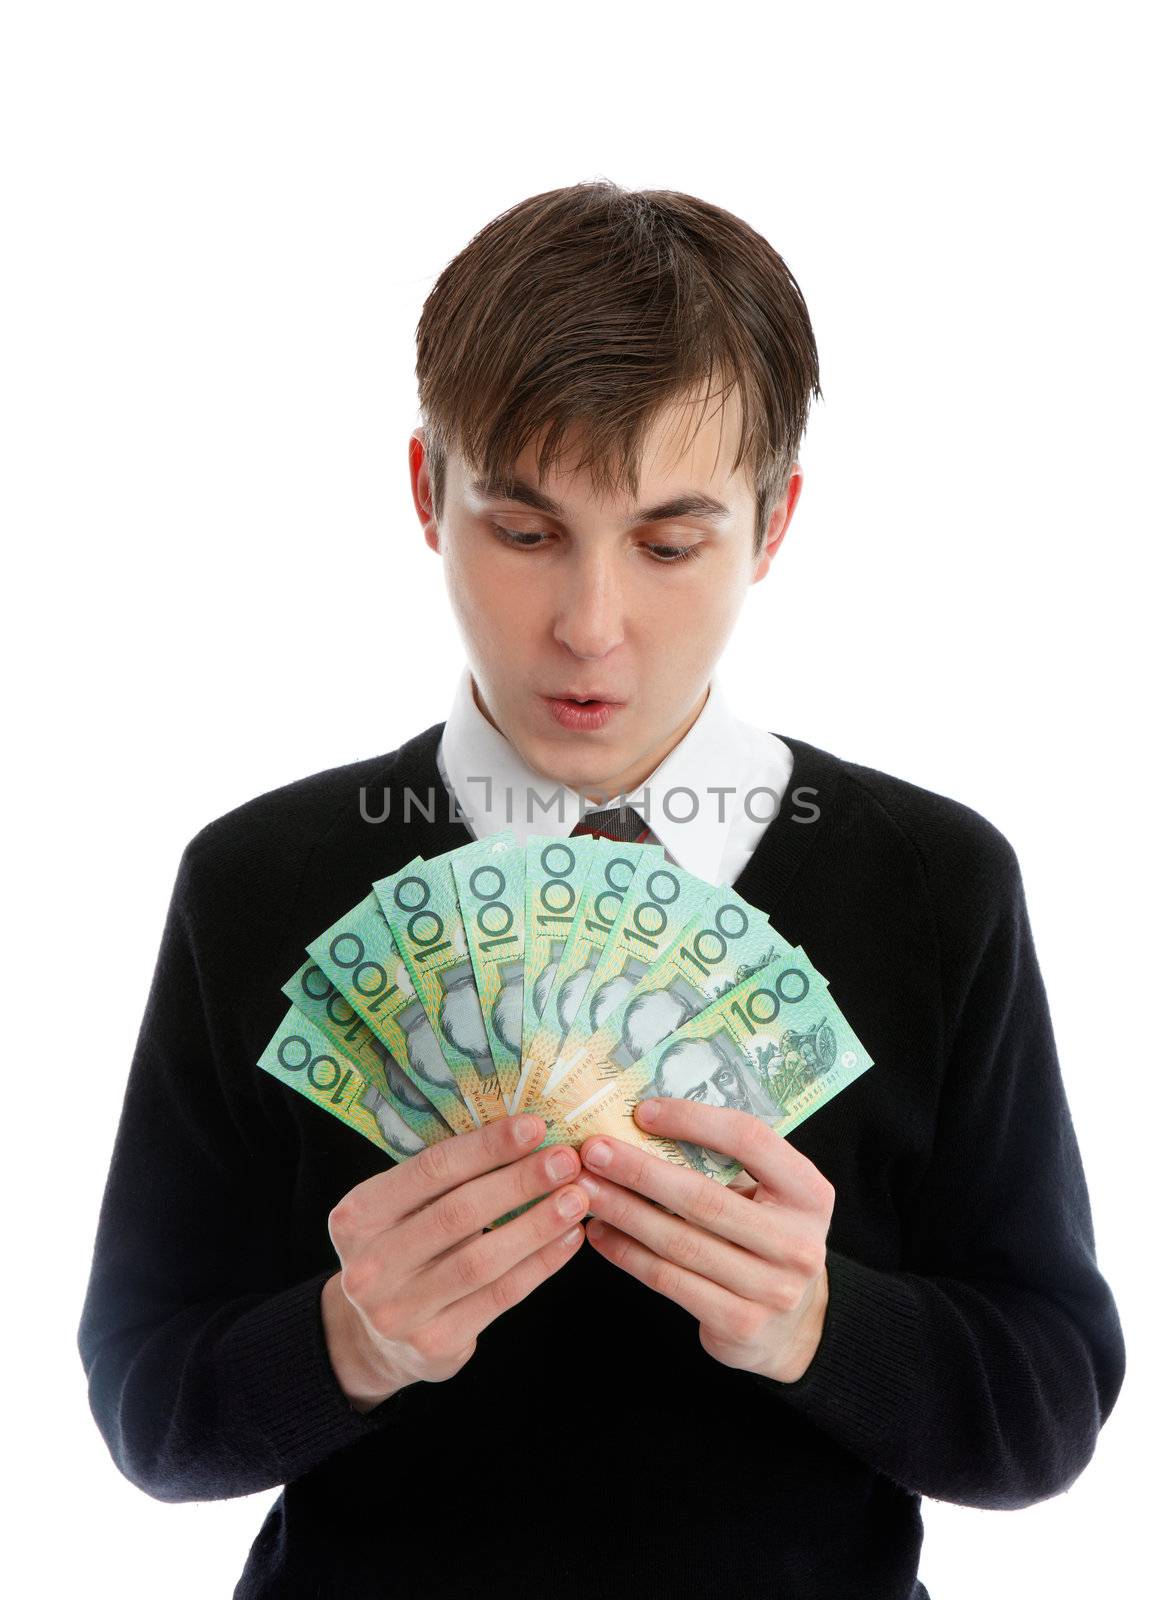 A student or young worker looking with great amazement at a fan of banknotes in his hand.  Concept shcolarship, fundraising, fees, winnings, wages, etc.    NB: less than 1/2 note in view. (http://www.secretservice.gov/money_illustrations.shtml)